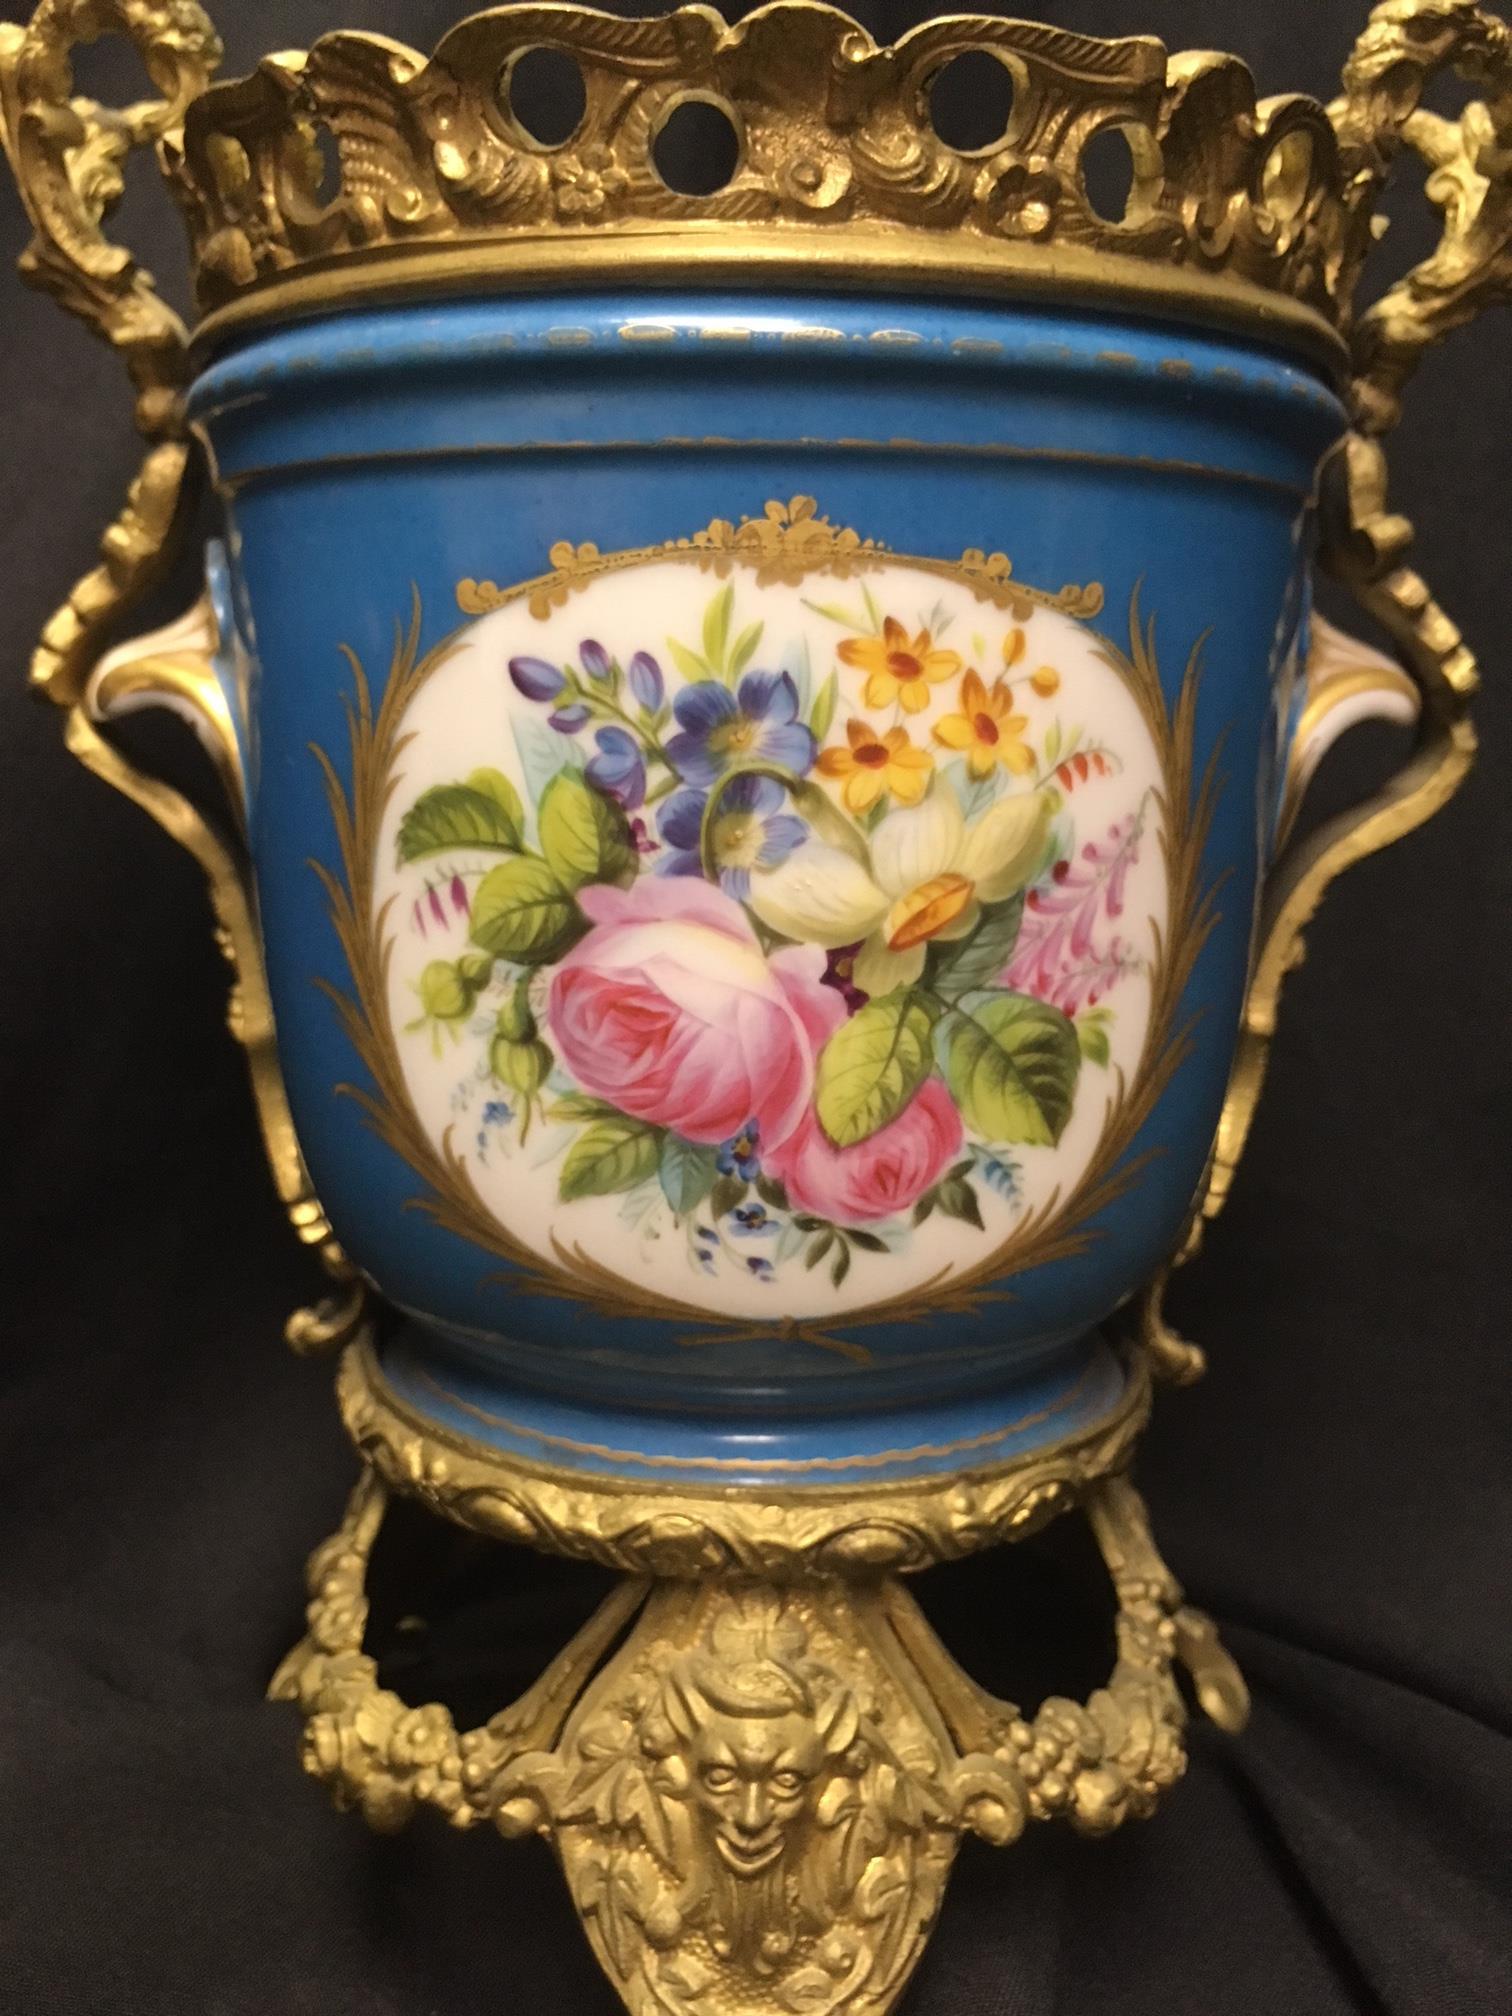 19th Century Pair of French Sevres Style Ormolu-Mounted Porcelain Planters